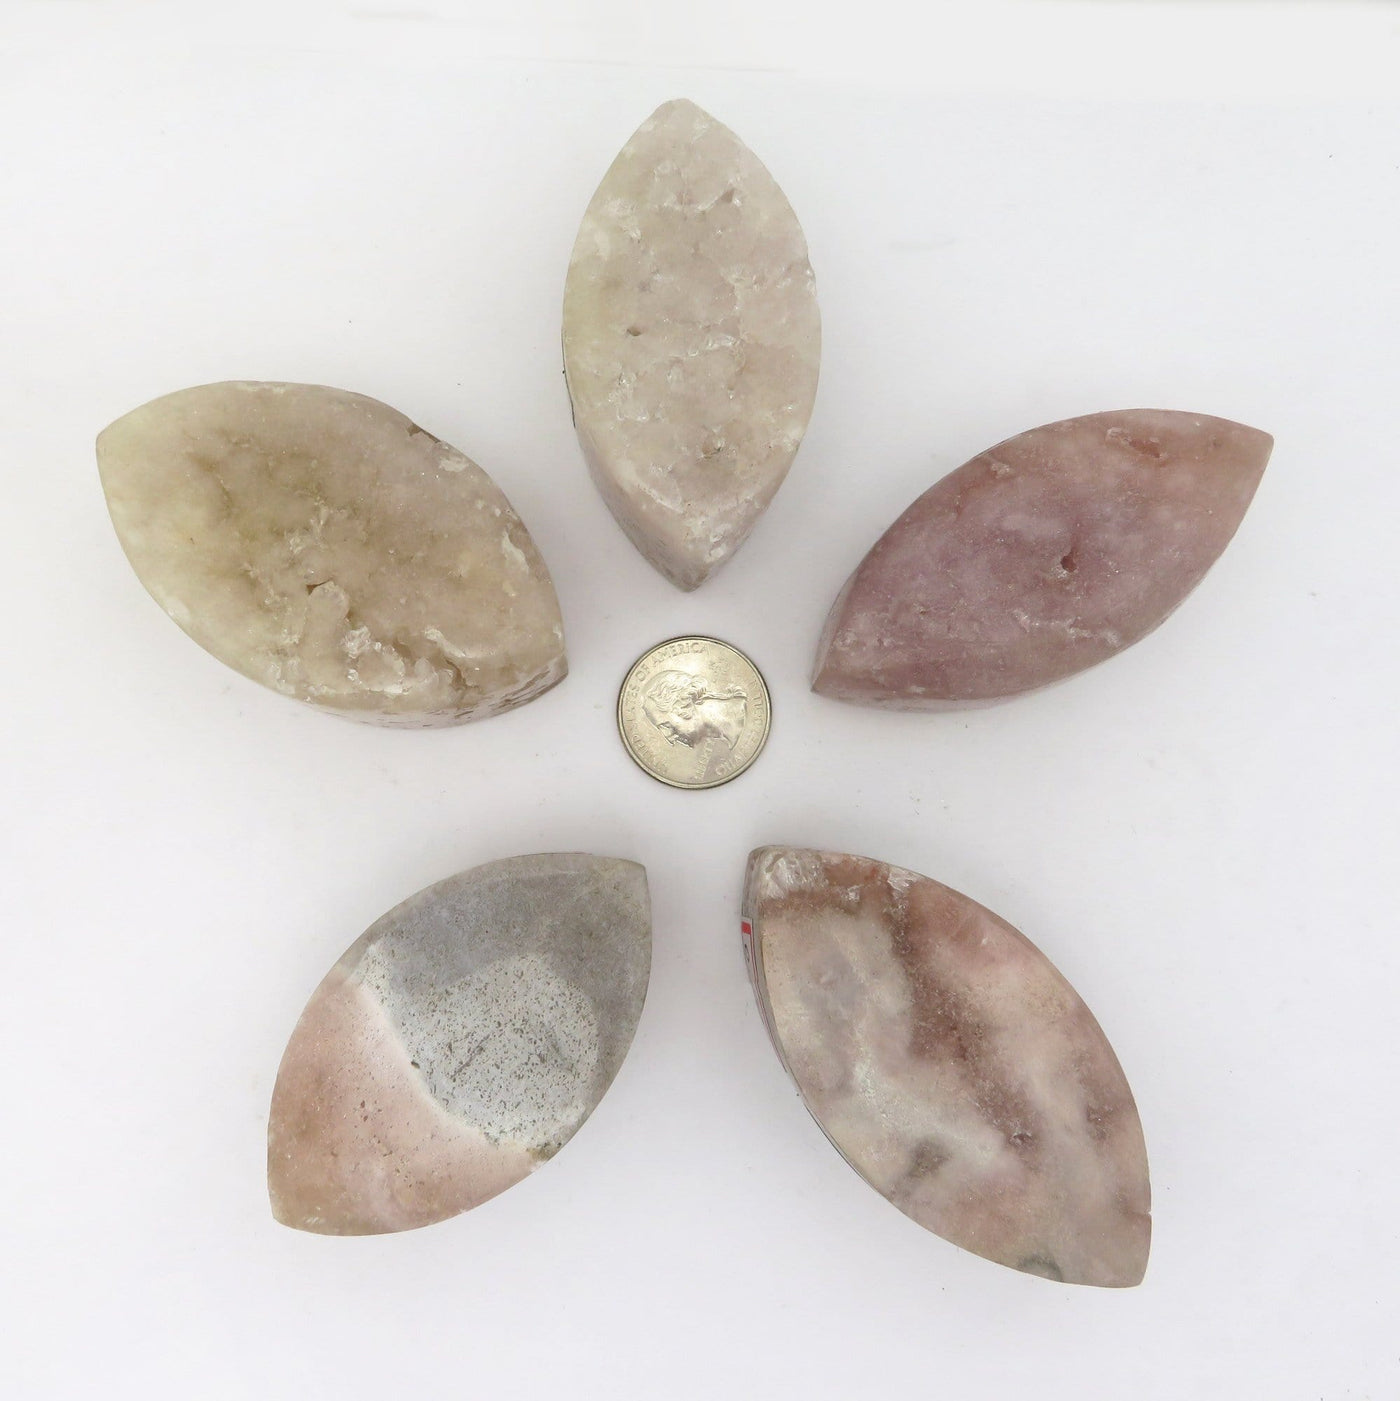 5 Pink Amethyst Polished Marquise Stone Shapes surrounding a quarter for size reference